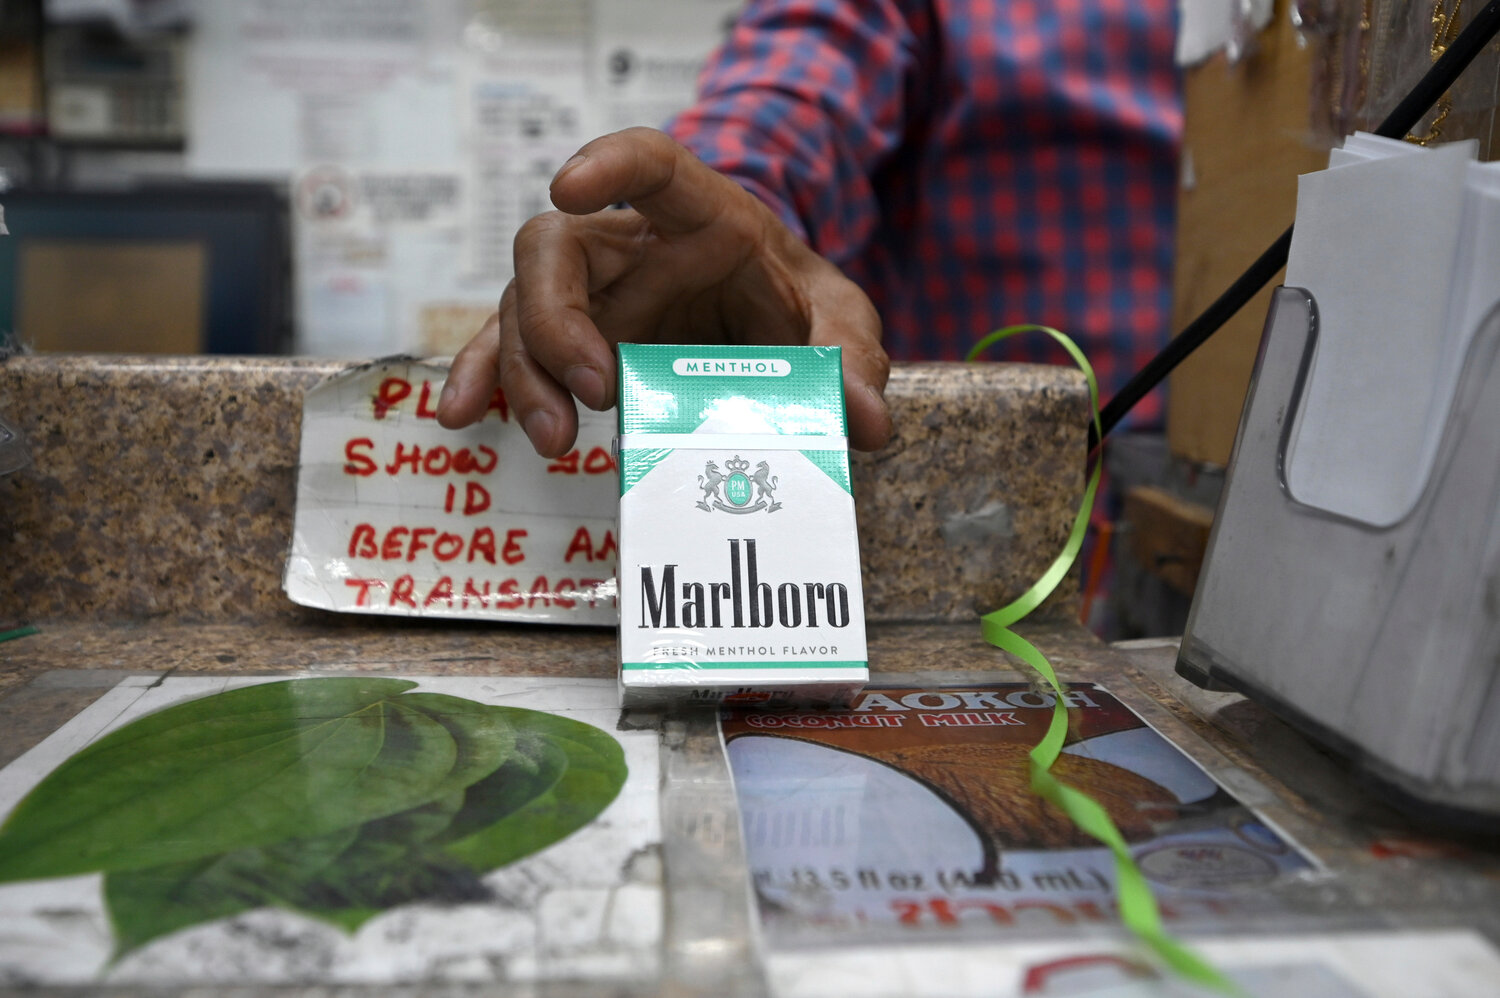 A Queens shopkeeper holds a pack of Menthol Marlboro cigarettes. The FDA announced it intends to ban menthol cigarettes due to higher rates of smoking-related illness and death in African-Americans communities. Our columnist argues the ban could pose unintended problems.